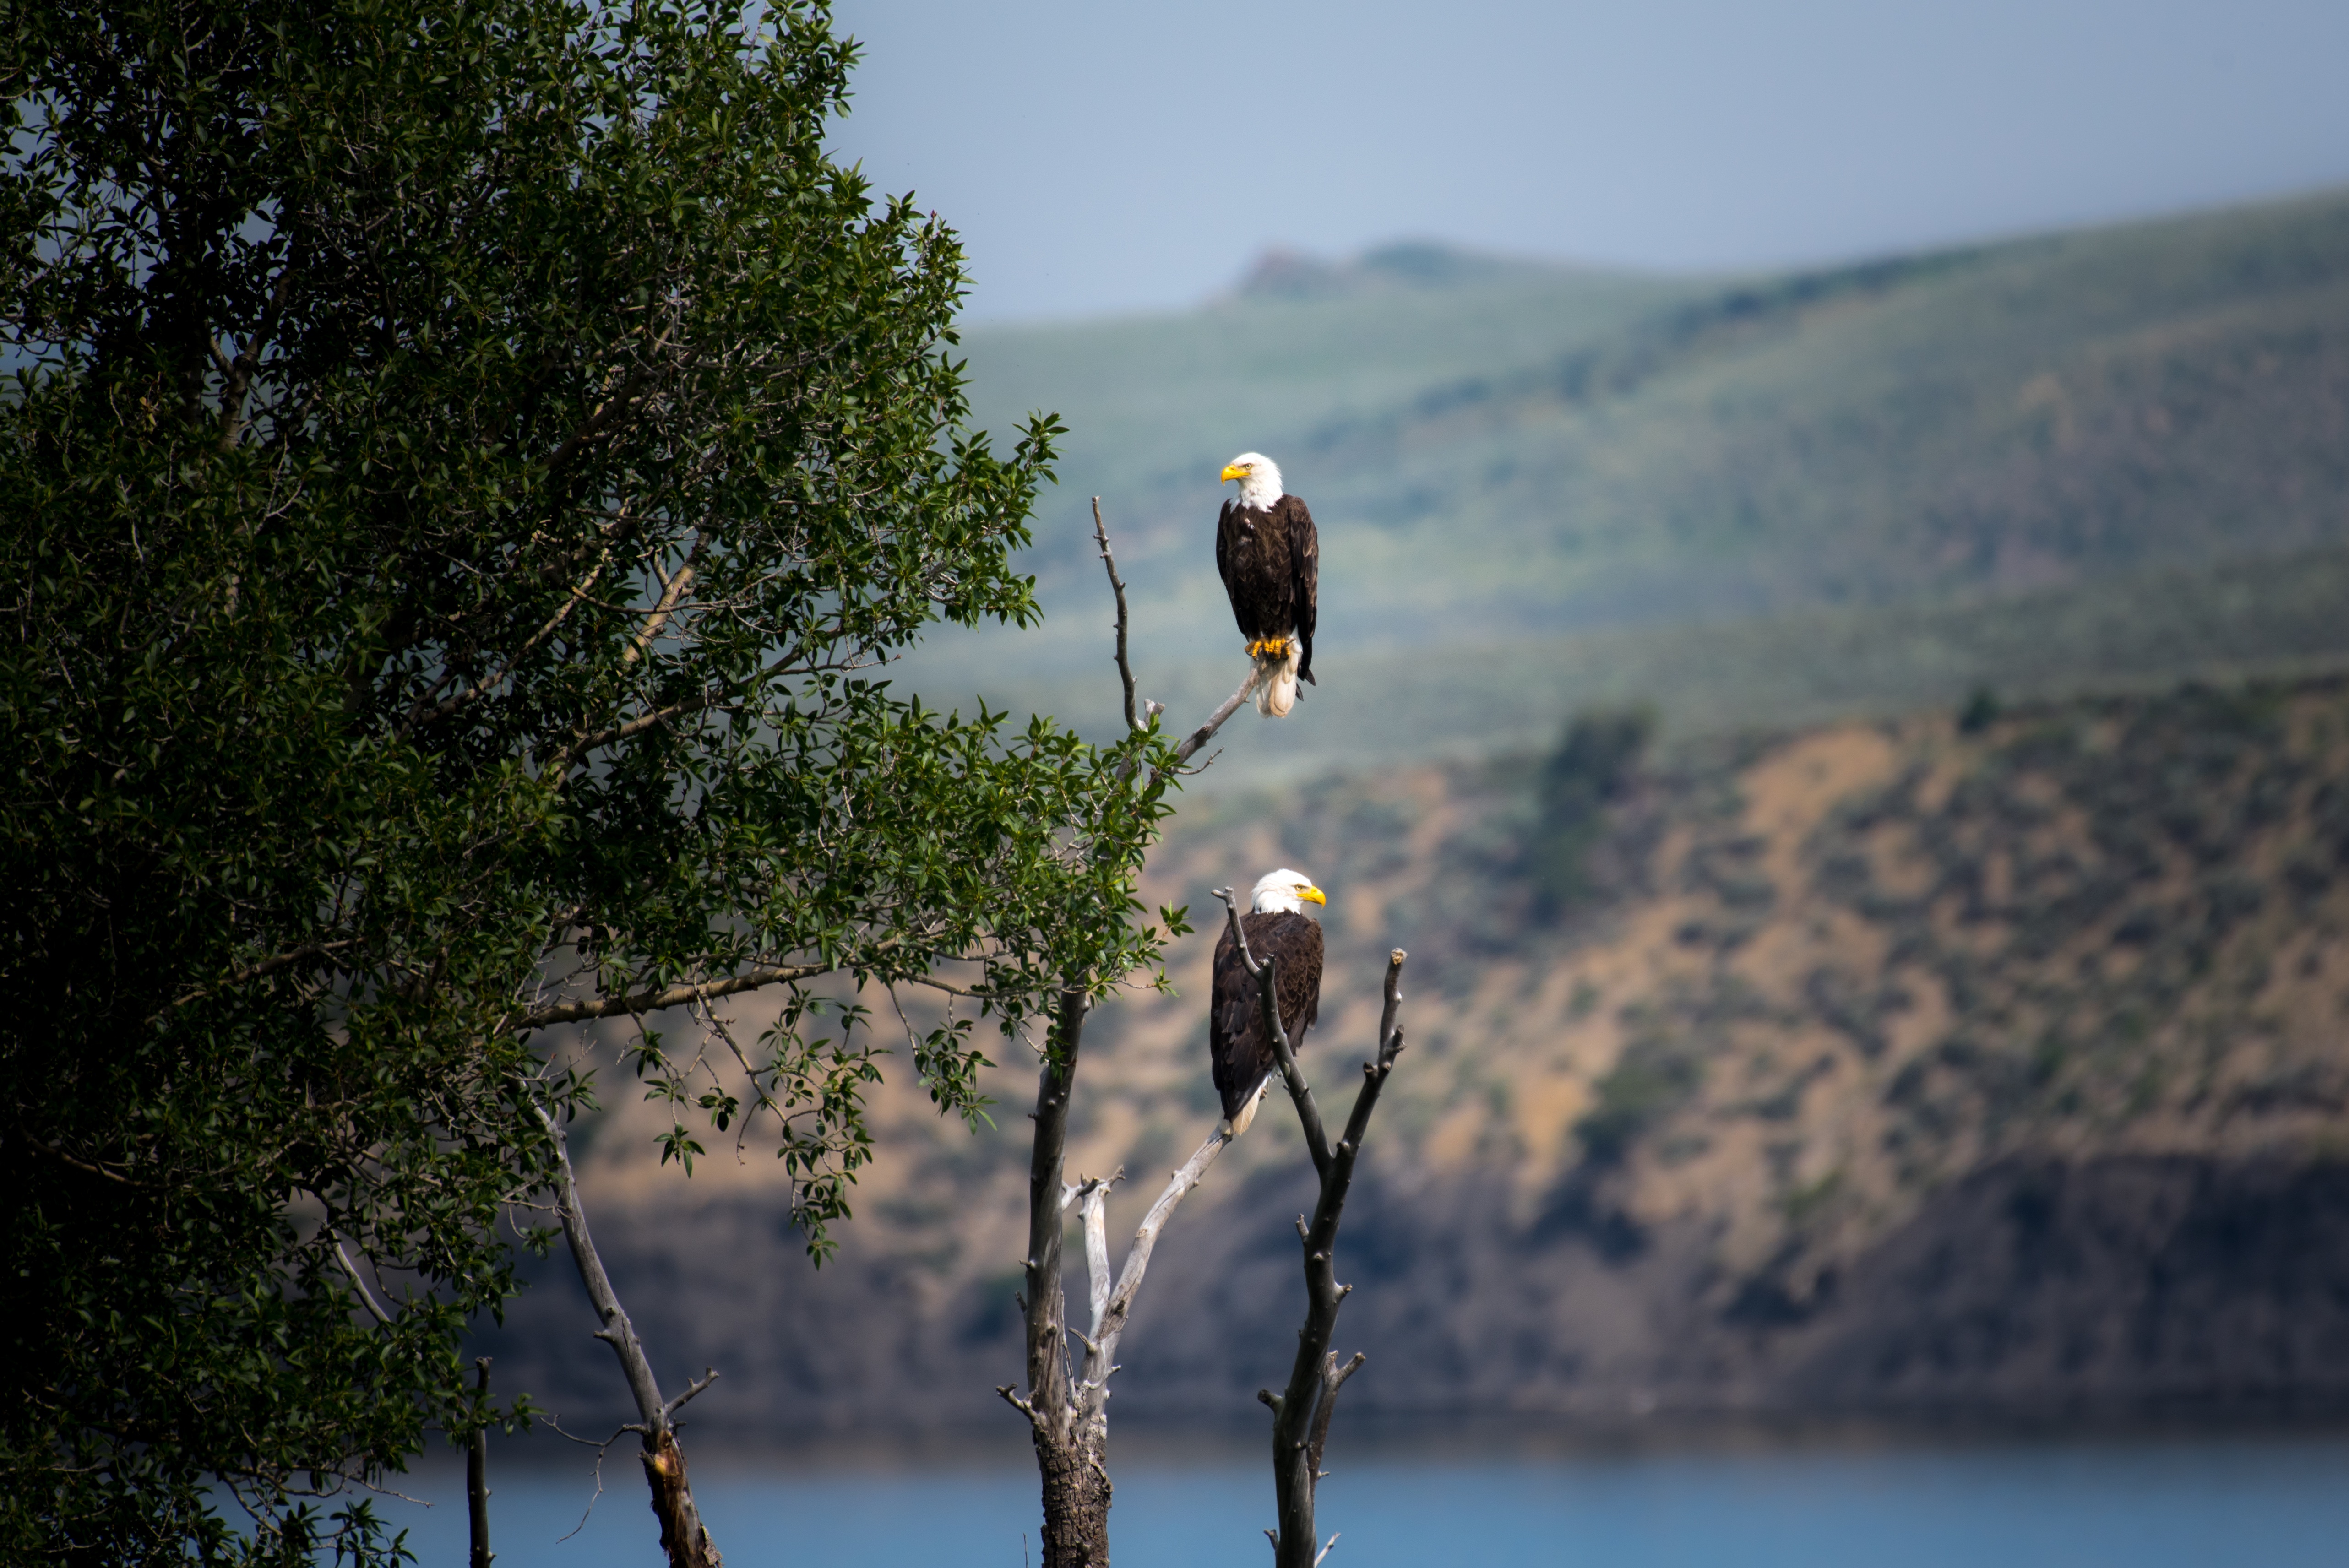 Two eagles perched on the branches of a tree